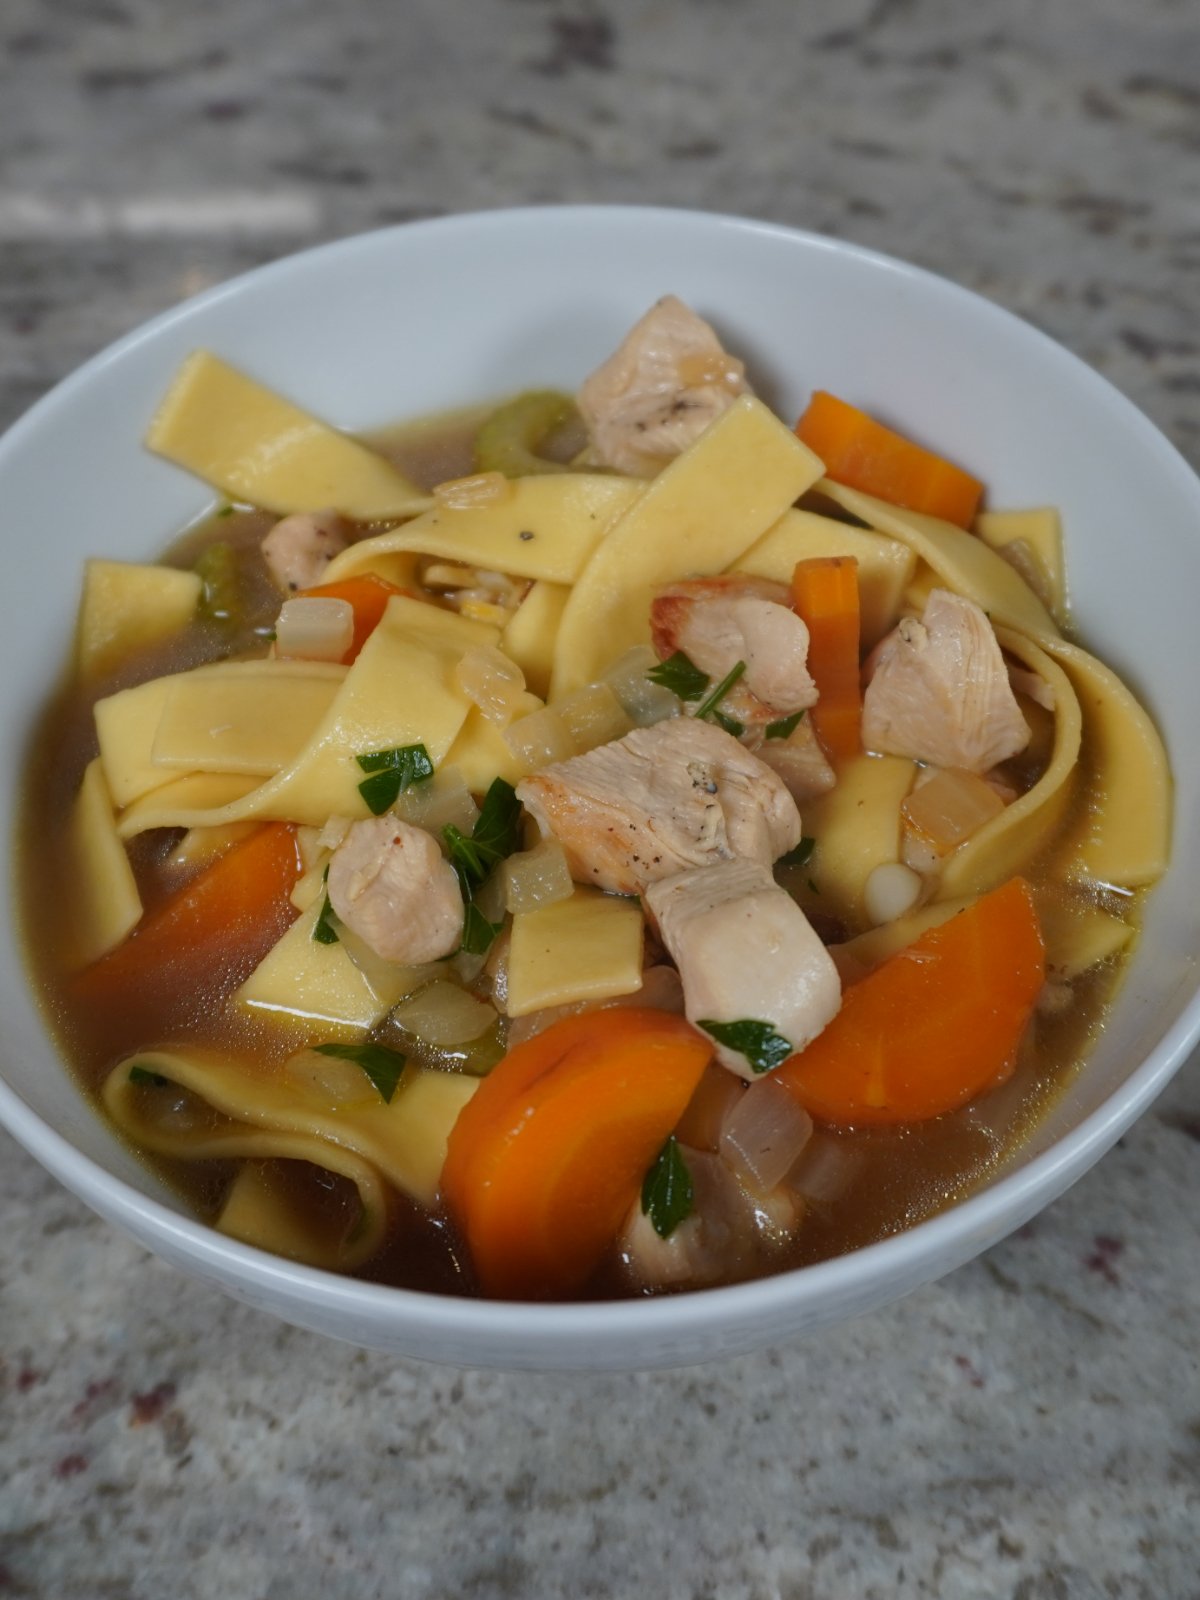 https://nate-cooks.com/wp-content/uploads/2022/09/Chicken-Noodle-Soup-Featured.jpg